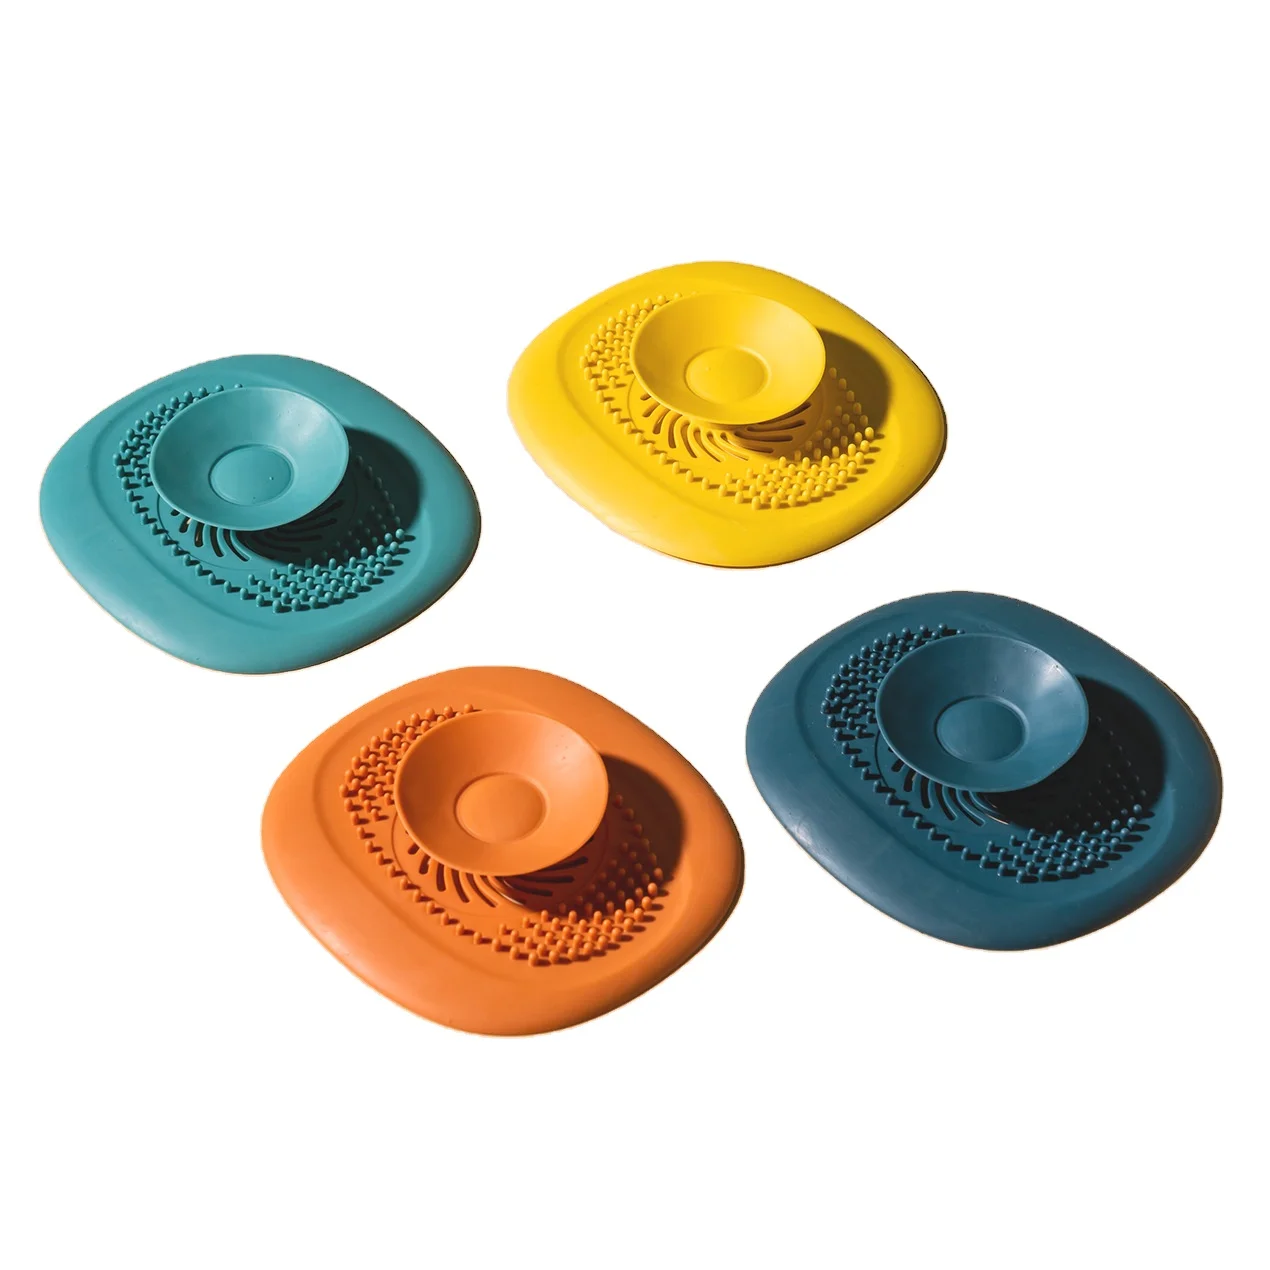 

Creative Kitchen TPR Plastic Sink Drain Filter Bathroom Floor Drain Cover Hair Catcher Sewer Anti Clogging Seal Cover